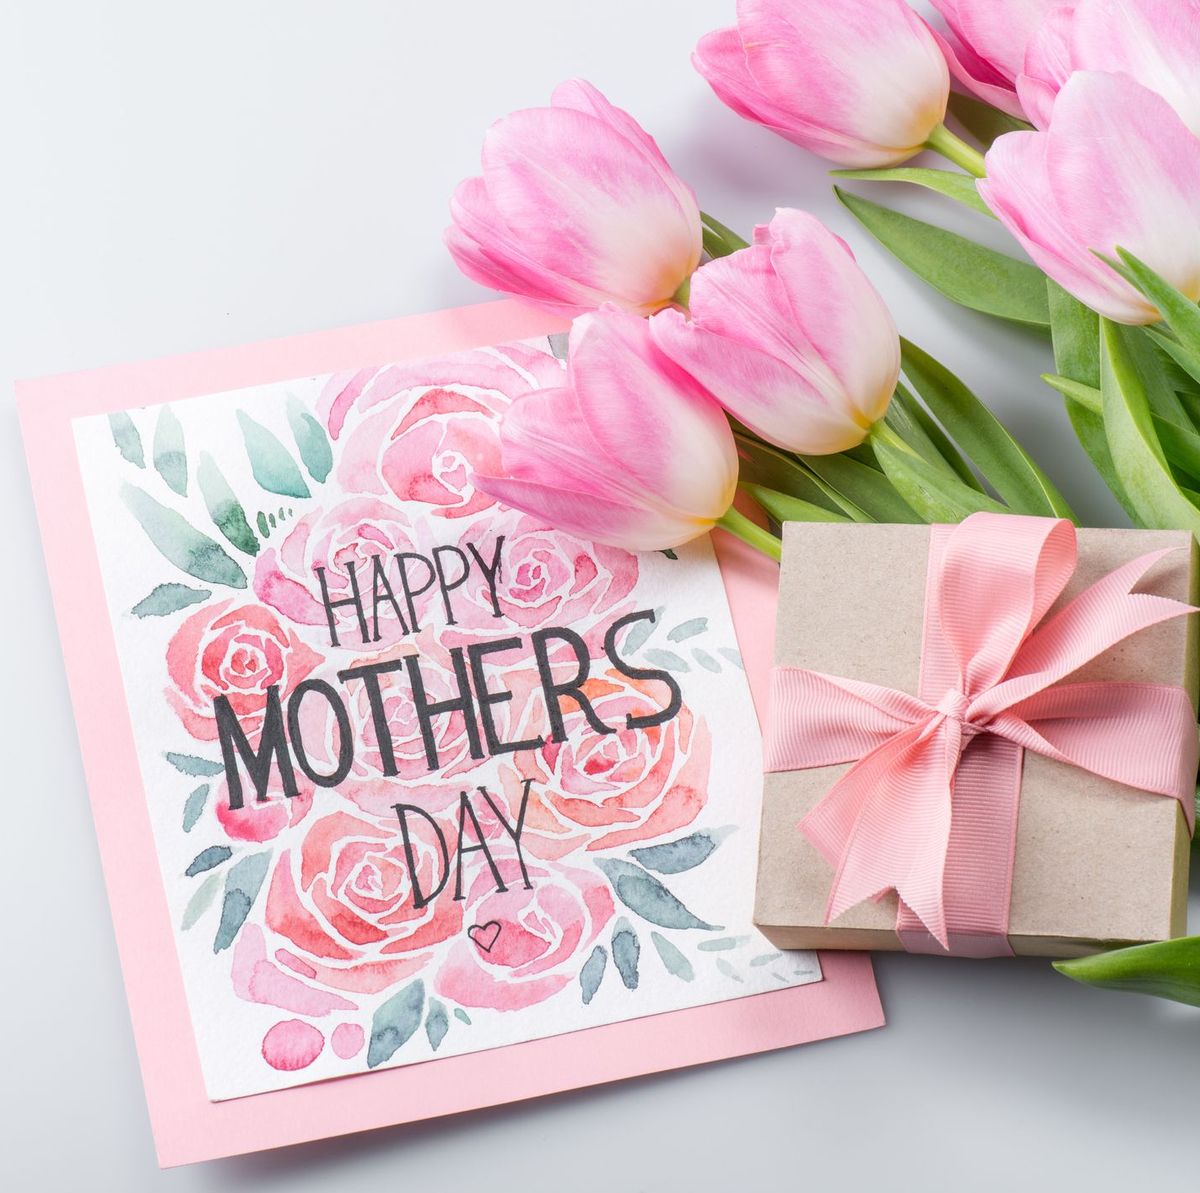 13 Simple Mother's Day Cards to Make (Part 2)